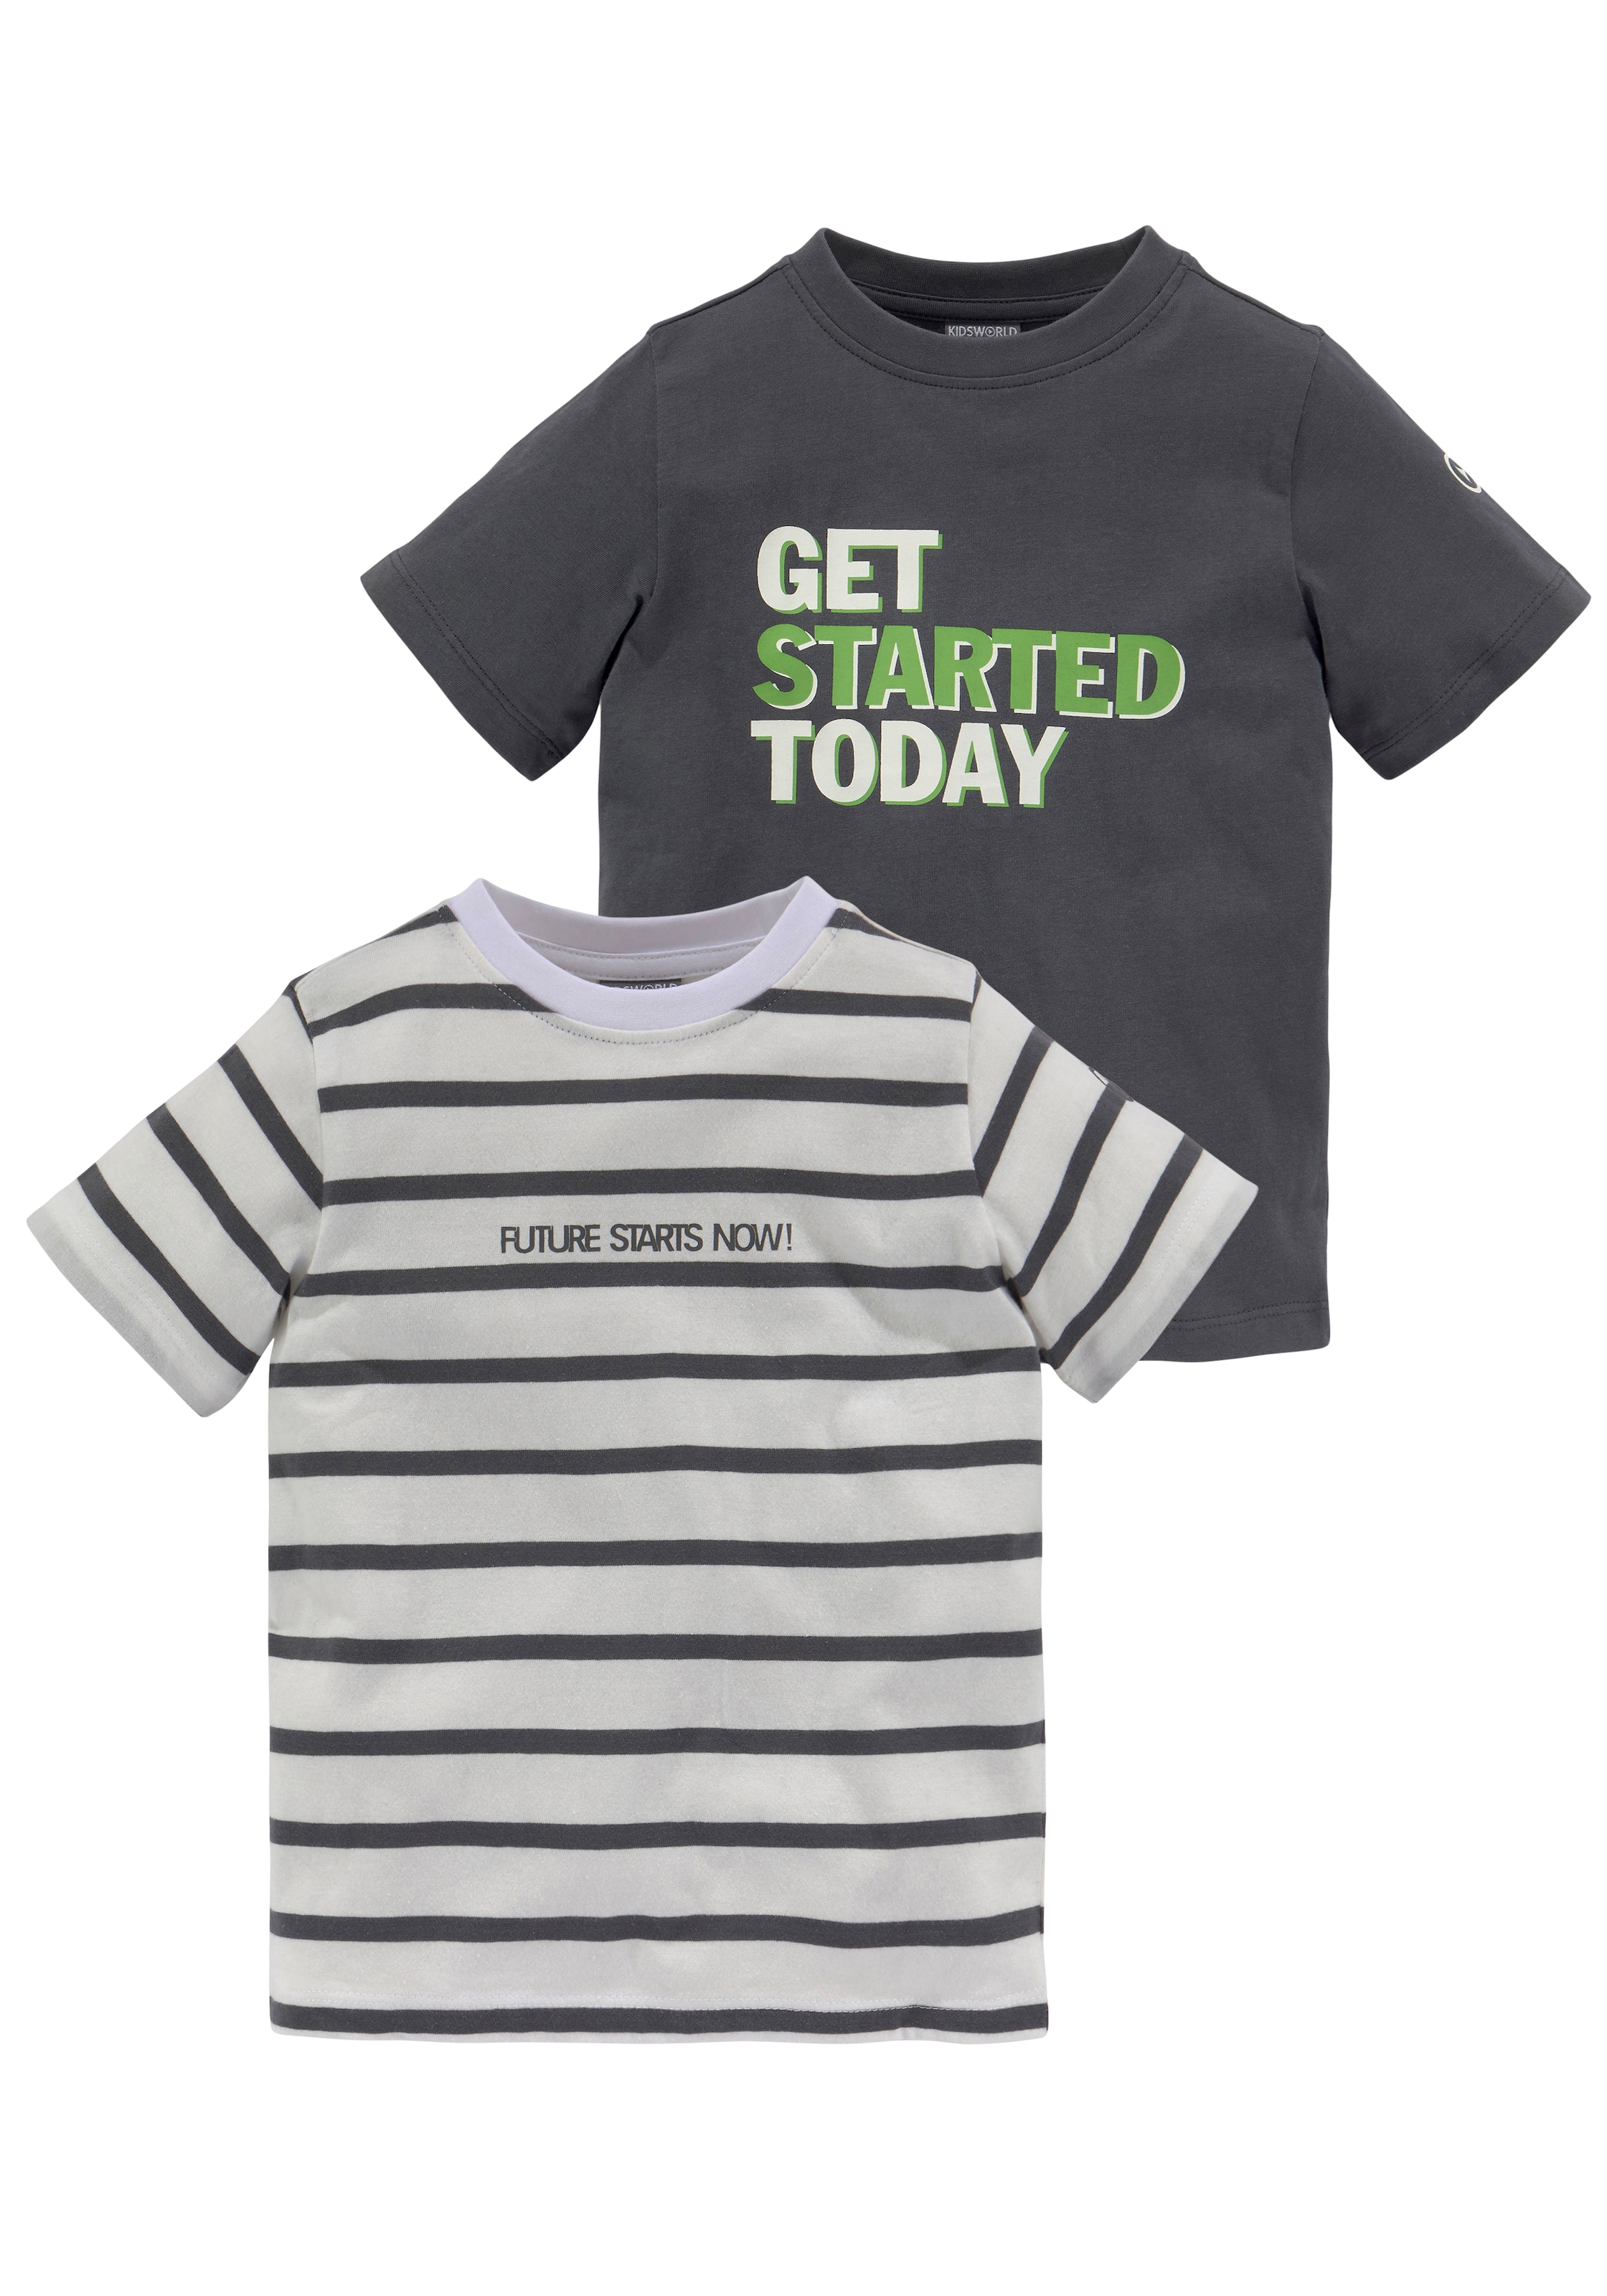 KIDSWORLD T-Shirt »TOMORROW Sprücheshirts tlg.), (Packung, bei IS TOO 2 LATE«